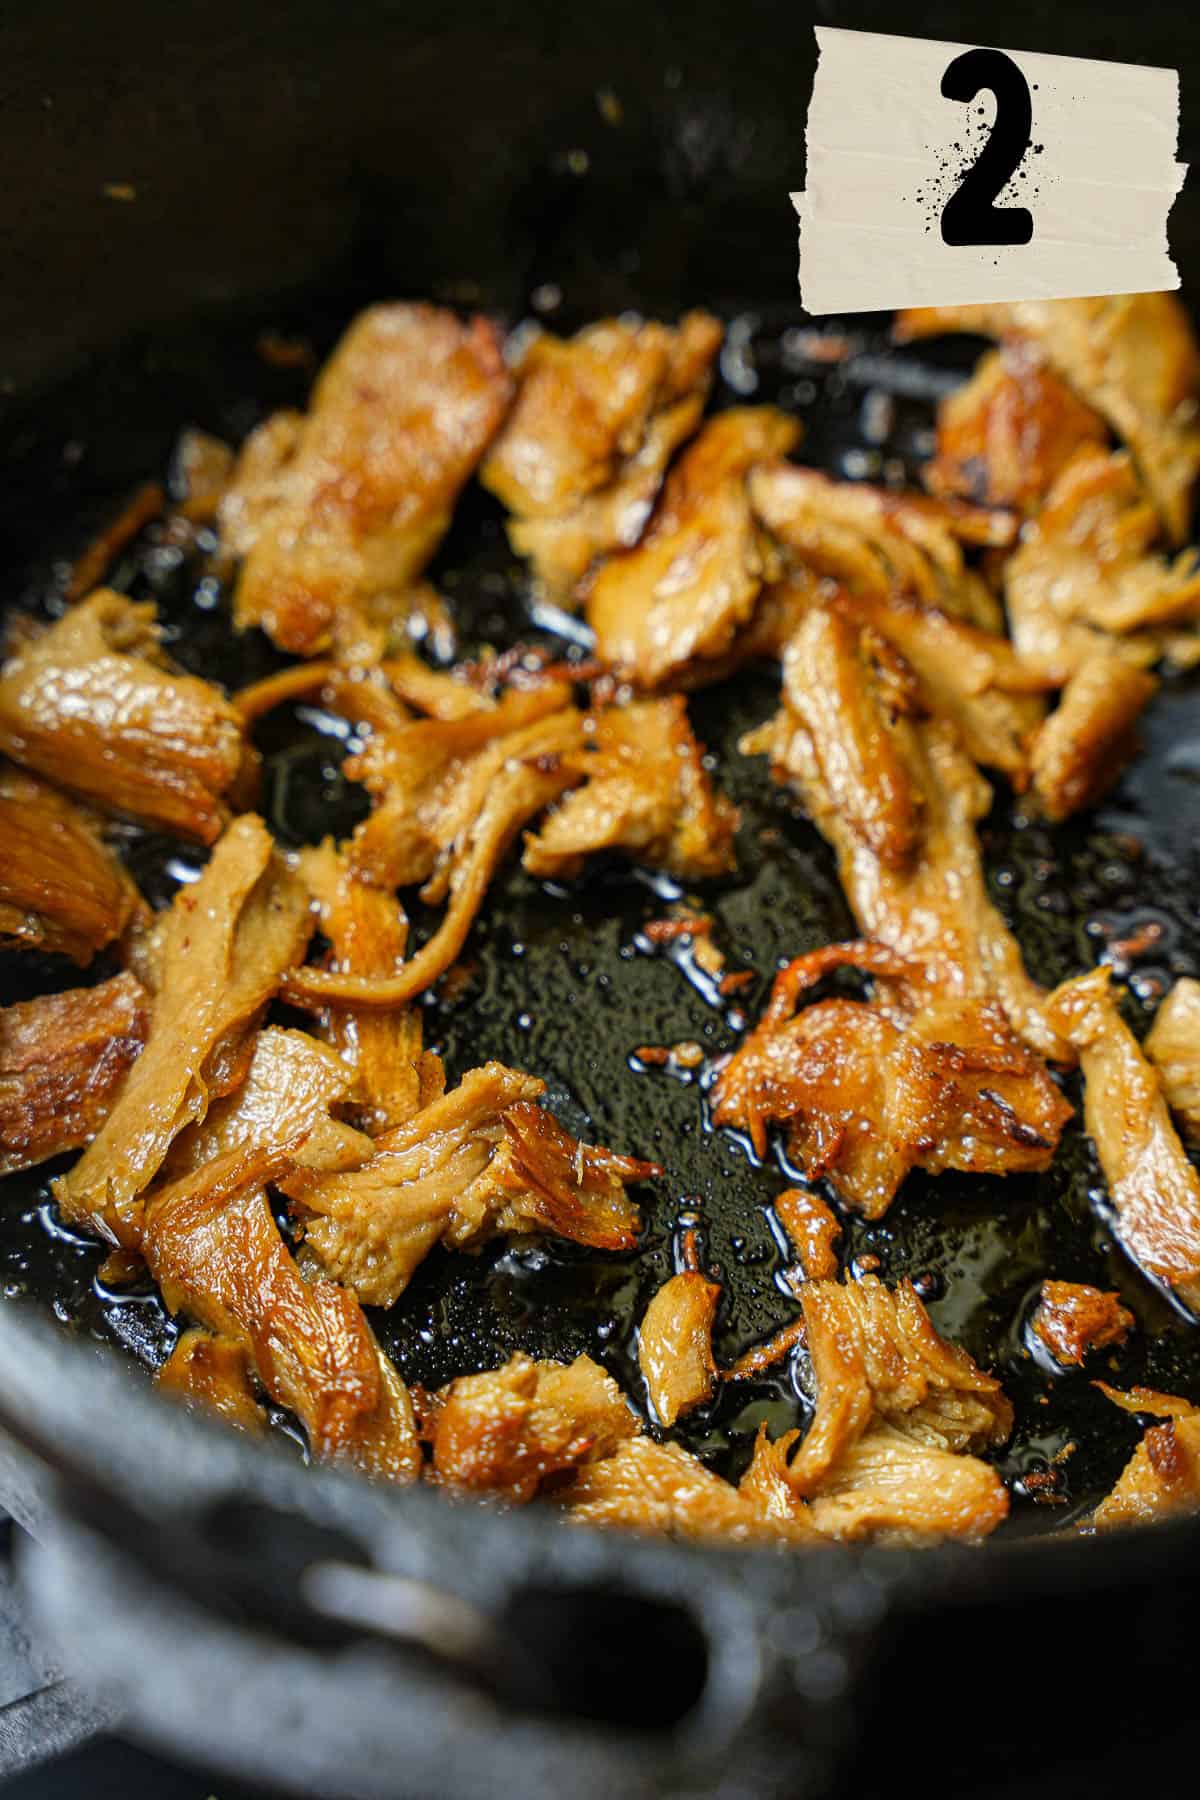 A frying pan with seitan sautéing in it.